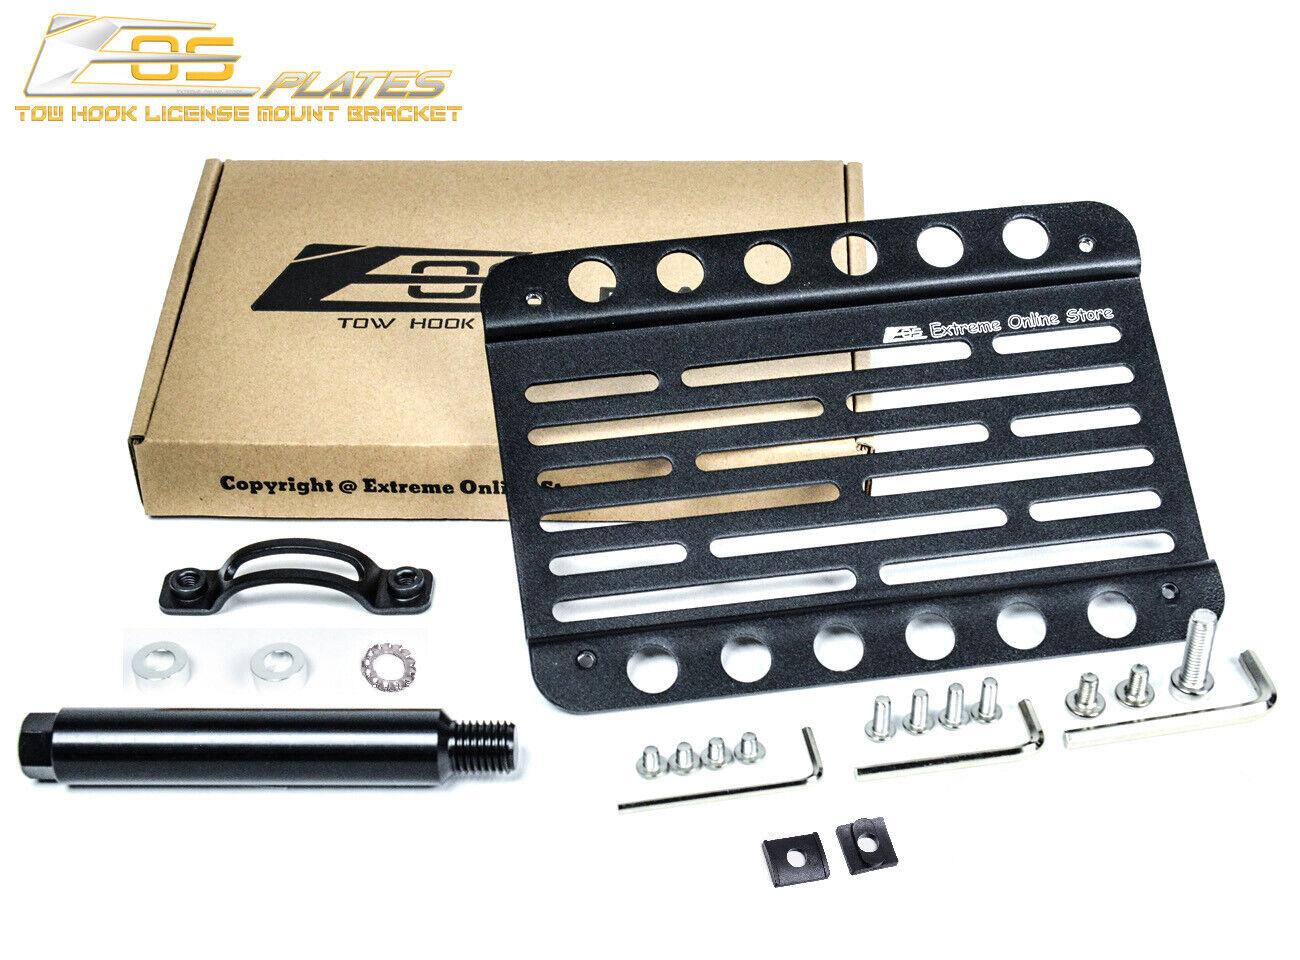 EOS For 97-00 Aston Martin DB7 | 00-04 DB7 Vantage Tow Hook License Plate Holder